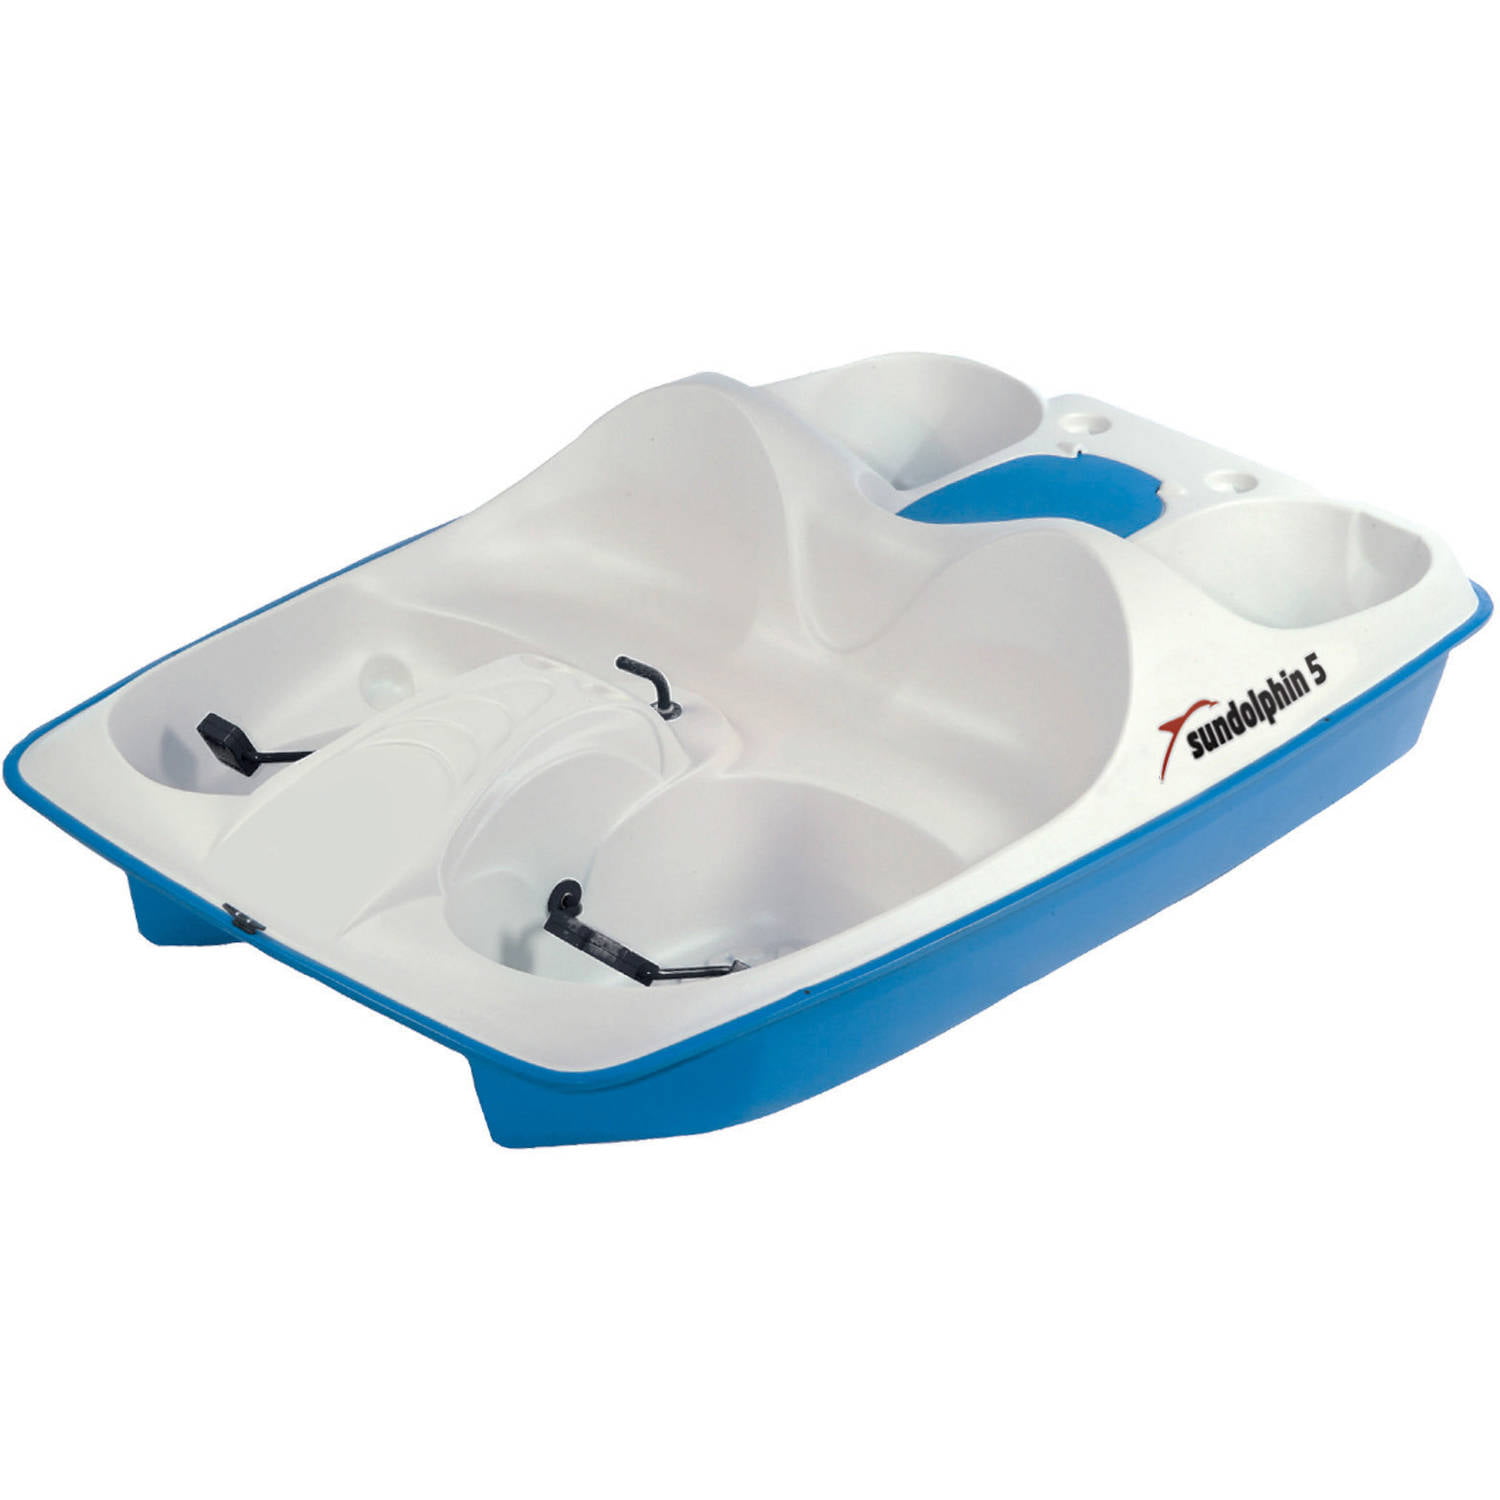 Sun Dolphin 5 Seat Pedal Boat Canopy Blue Water Sports Paddle Cooler Storage New